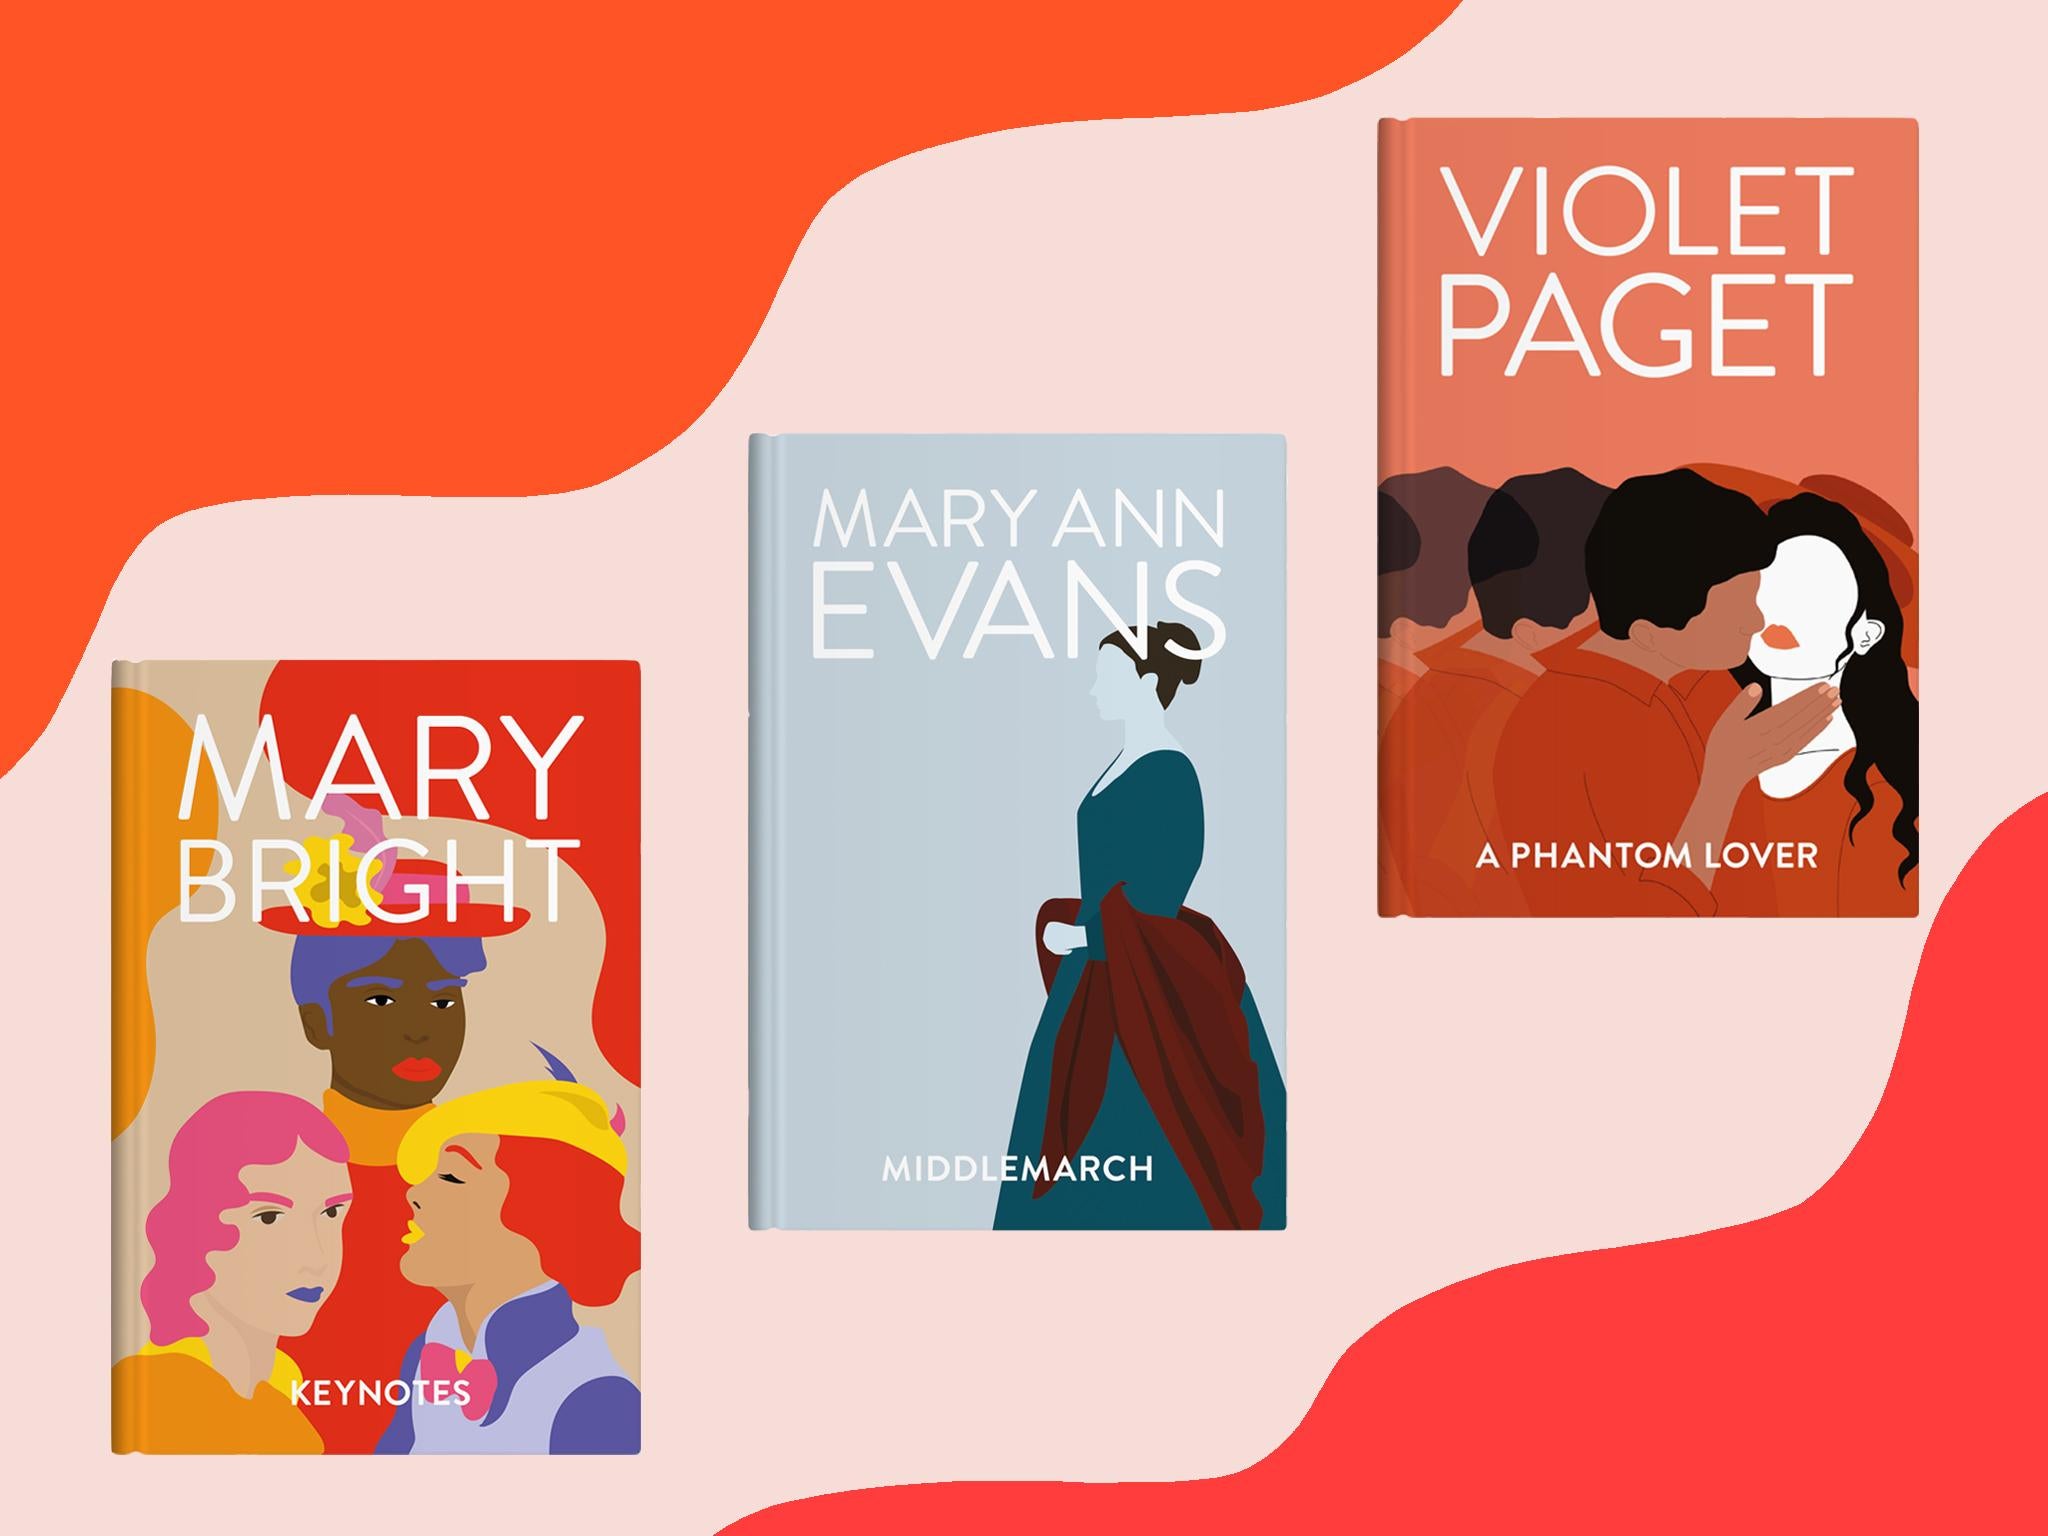 As well as new author names, all the books within the series have received a modern cover update from a selection of women illustrators across the world